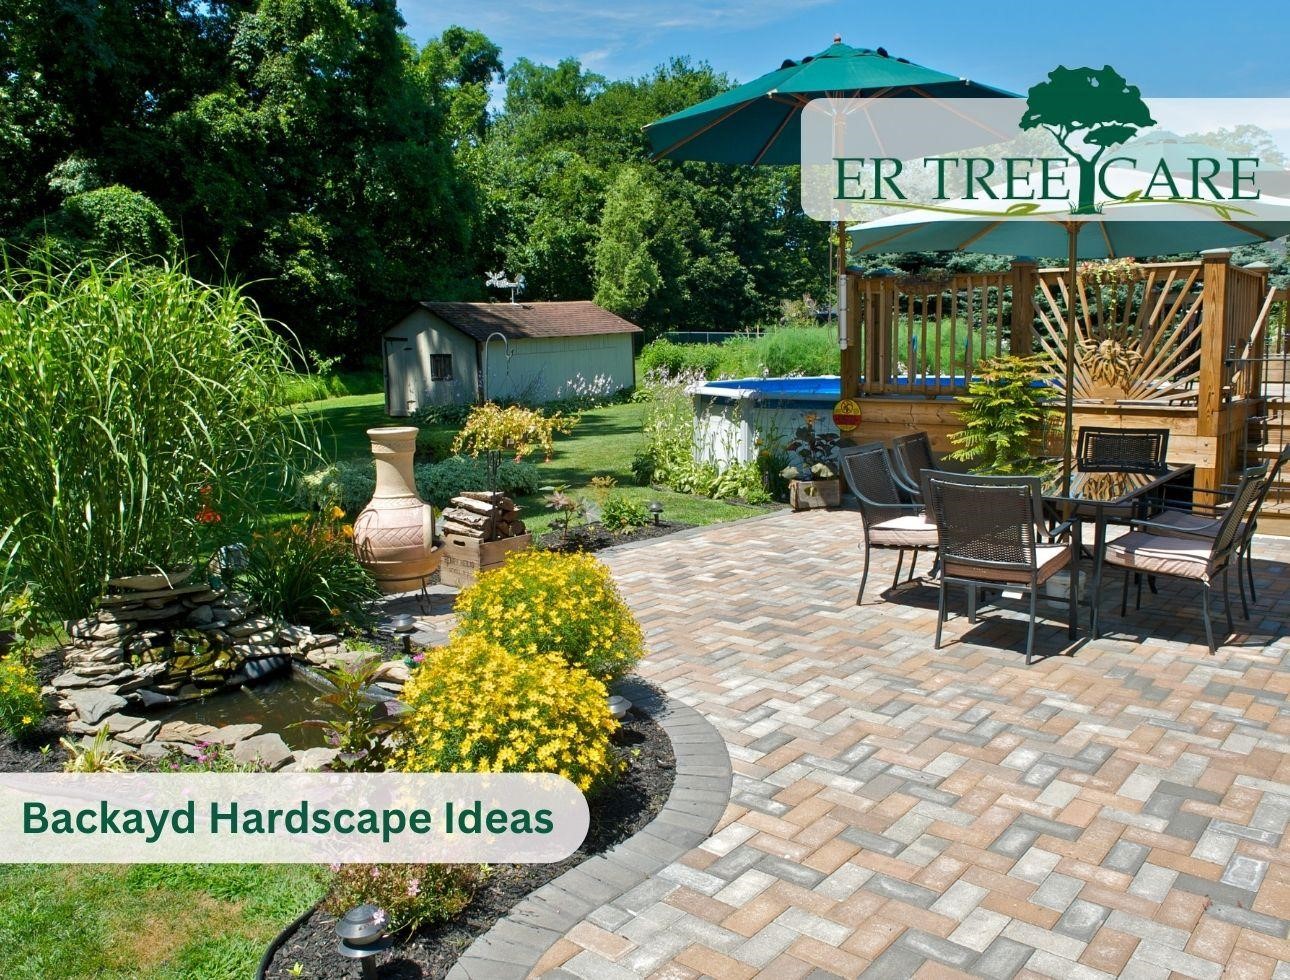 Enhance your backyard with these hardscaping ideas